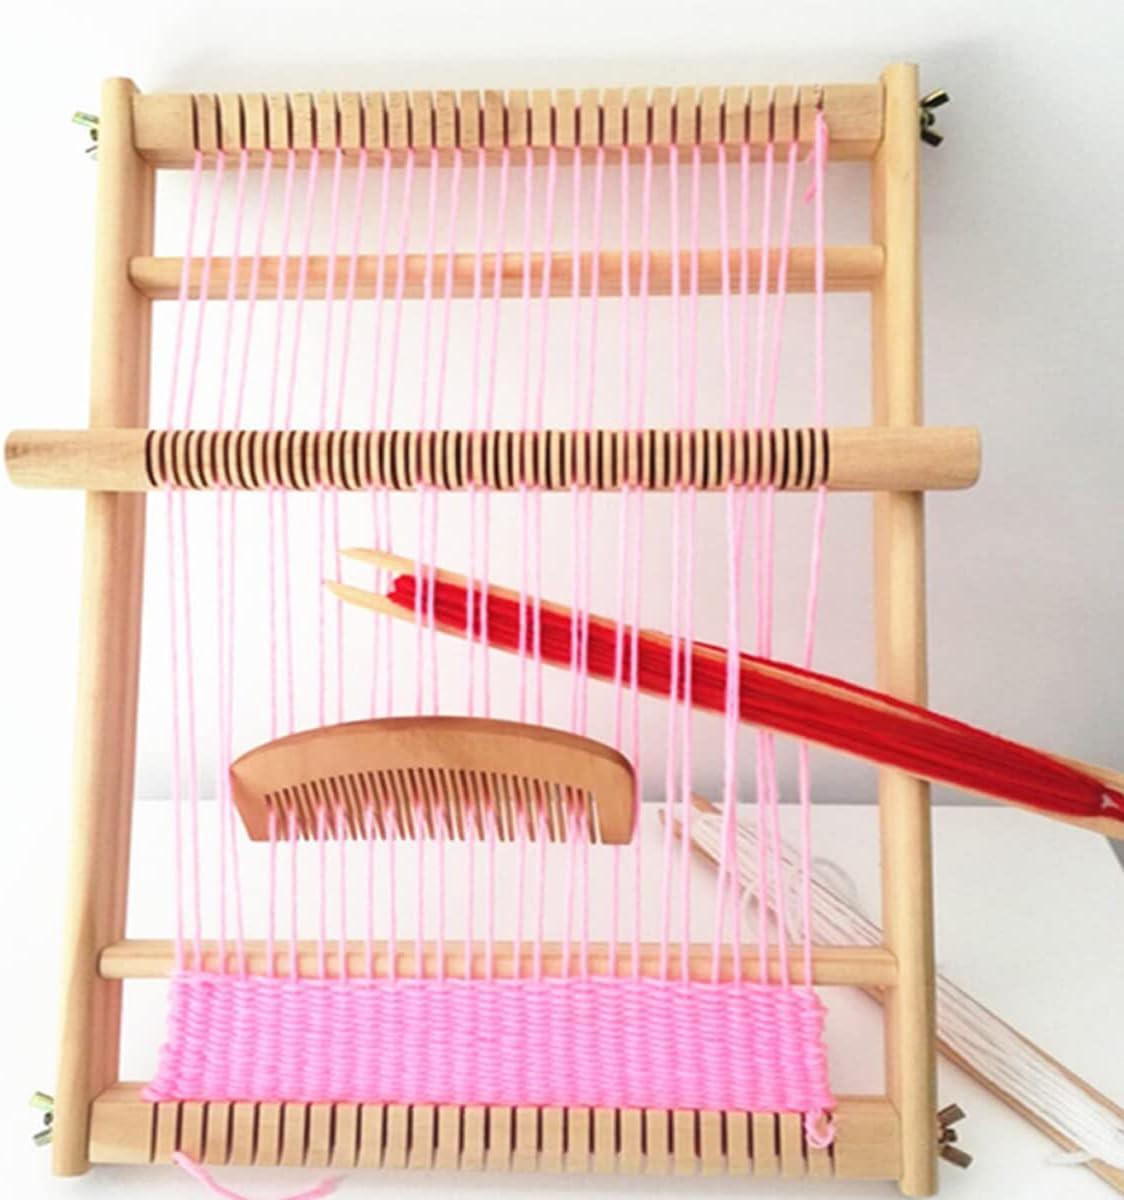 Tapestry Weaving Loom Kit Wooden Multi-craft Weaving Loom Large Frame  Tapestry Weaving Machine With Crochet And Braiding Comb - AliExpress